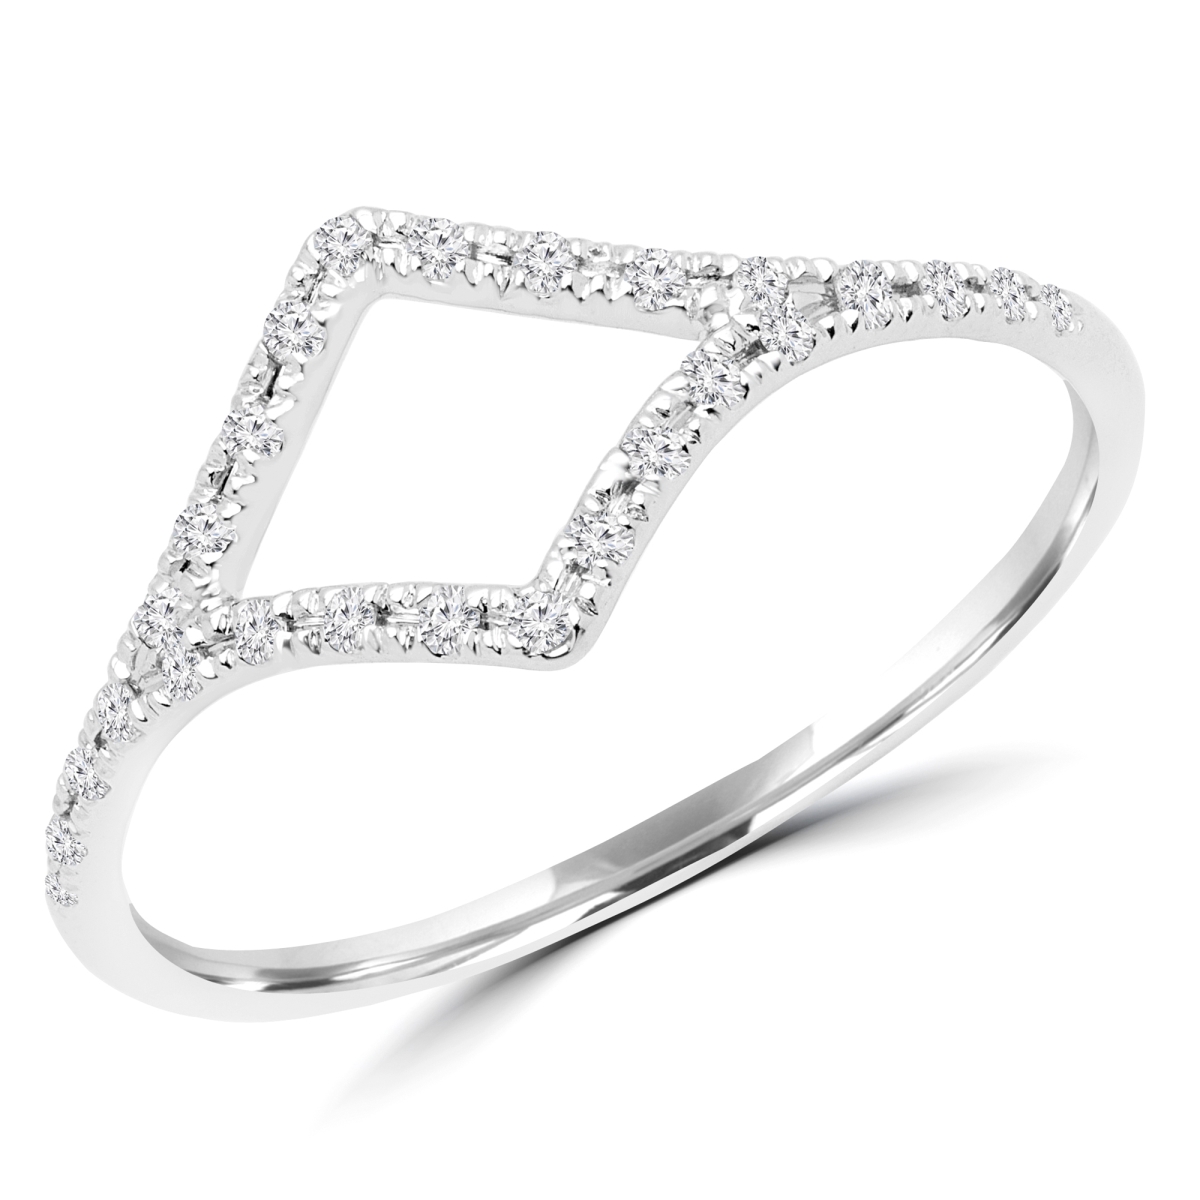 Picture of Majesty Diamonds MDR170053-9 0.1 CTW Round Diamond Cocktail Ring in 14K White Gold - 9